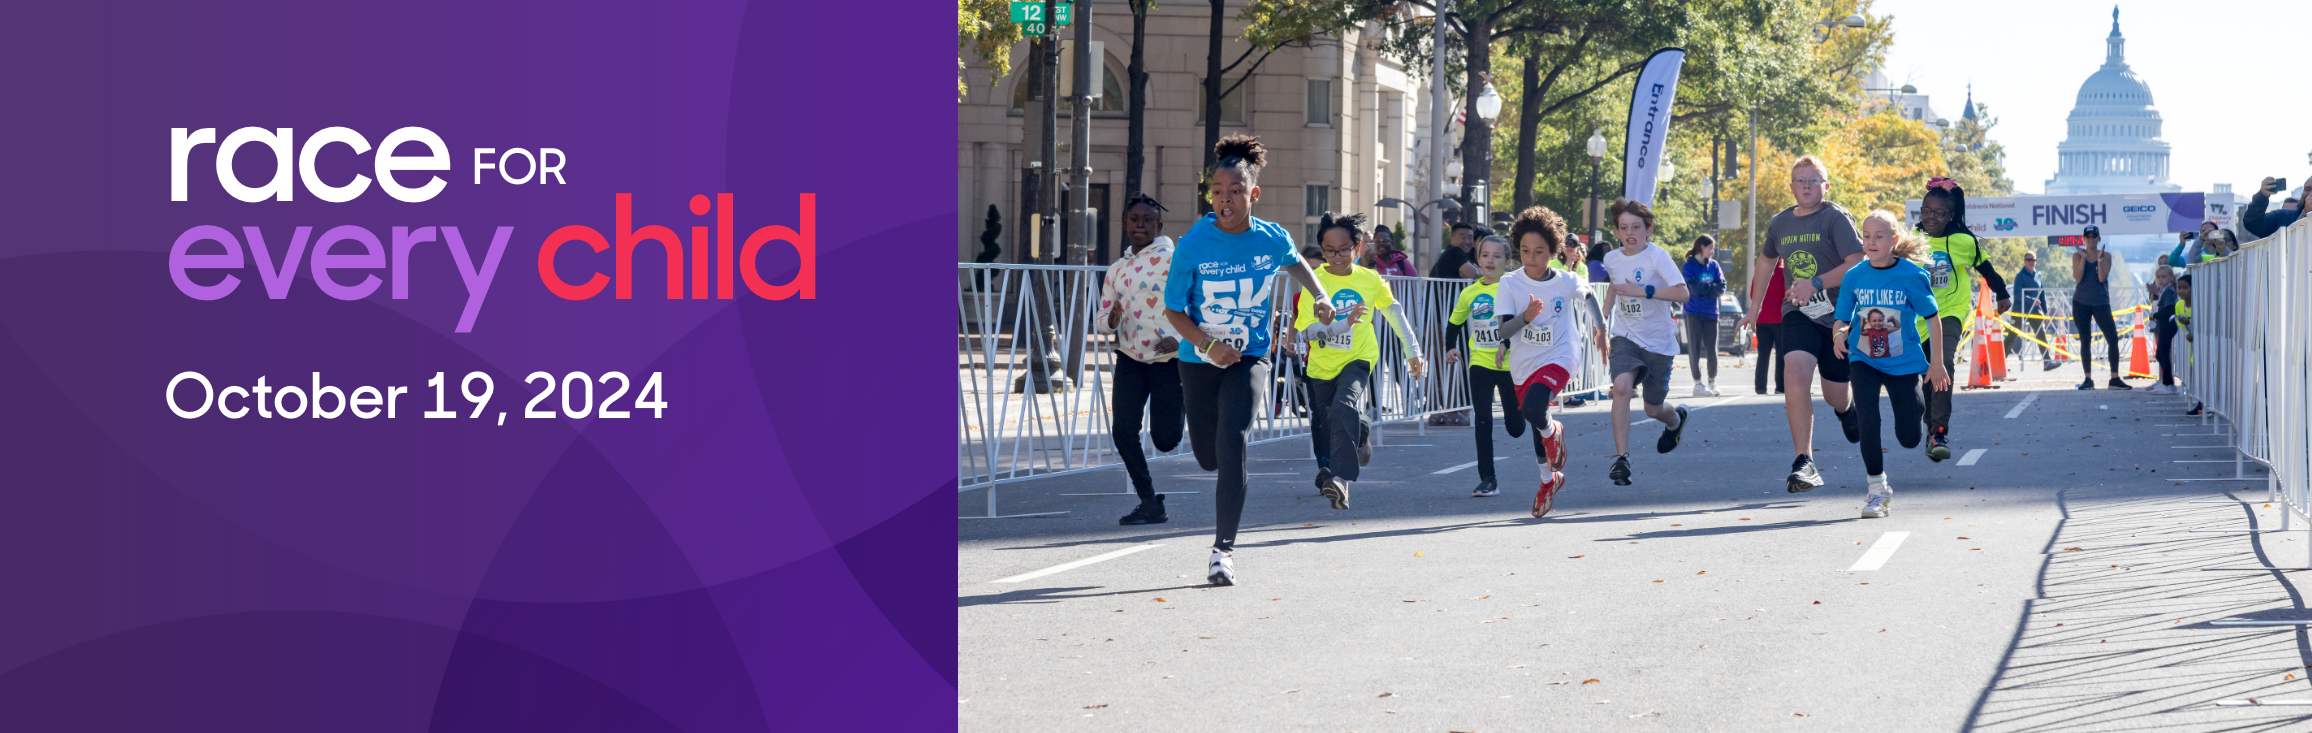 Race for Every Child - Saturday, October 21, 2023